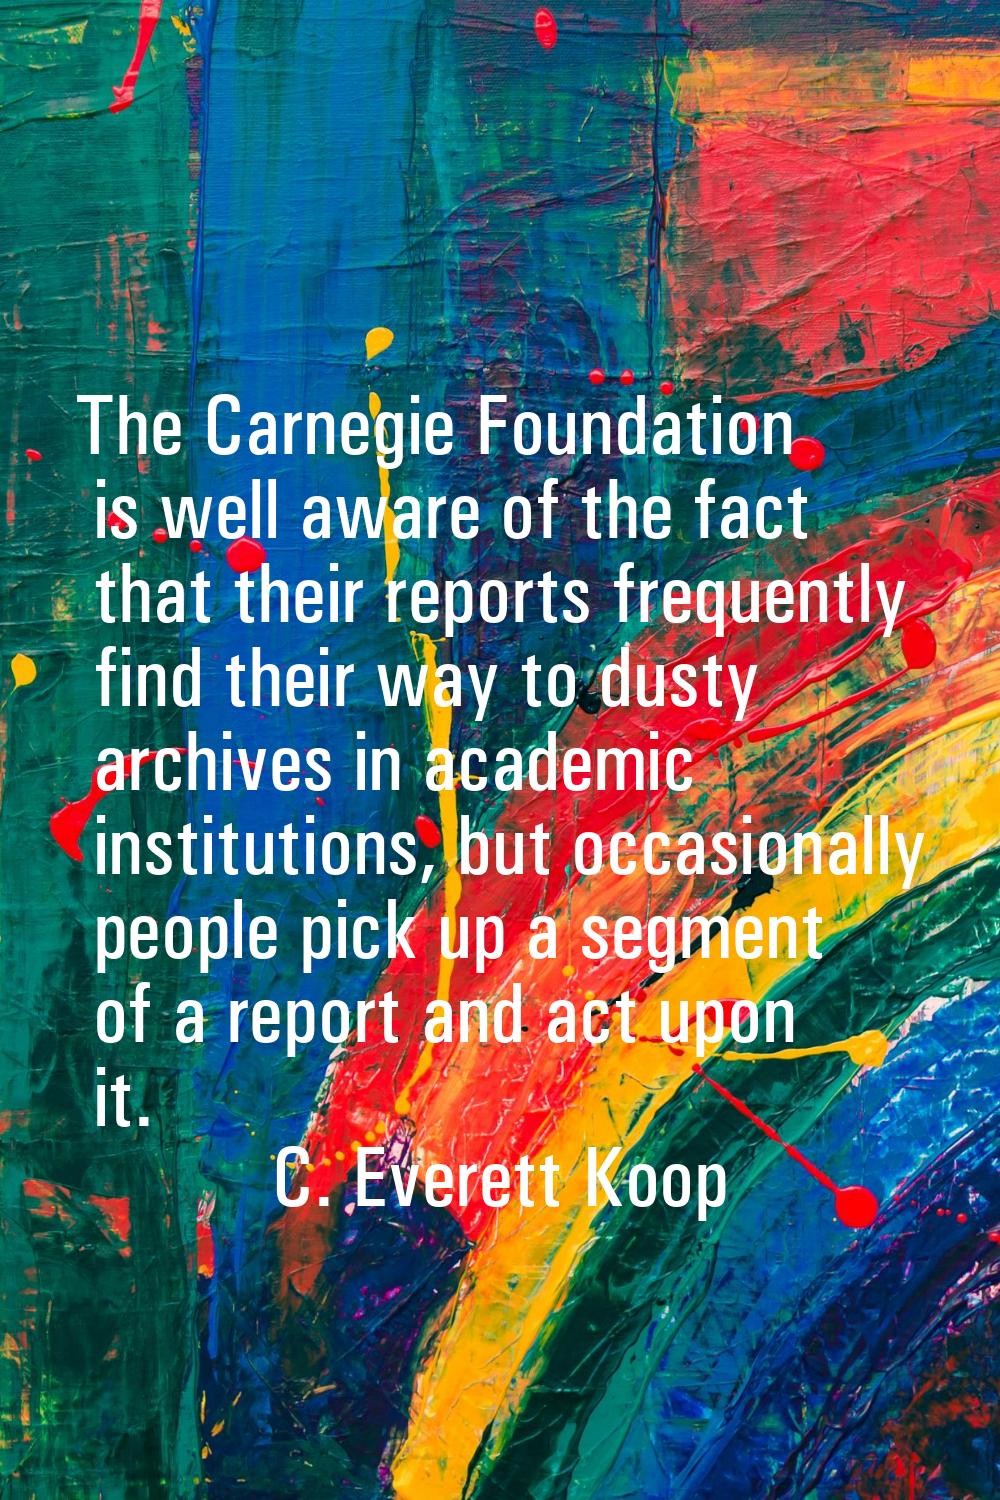 The Carnegie Foundation is well aware of the fact that their reports frequently find their way to d